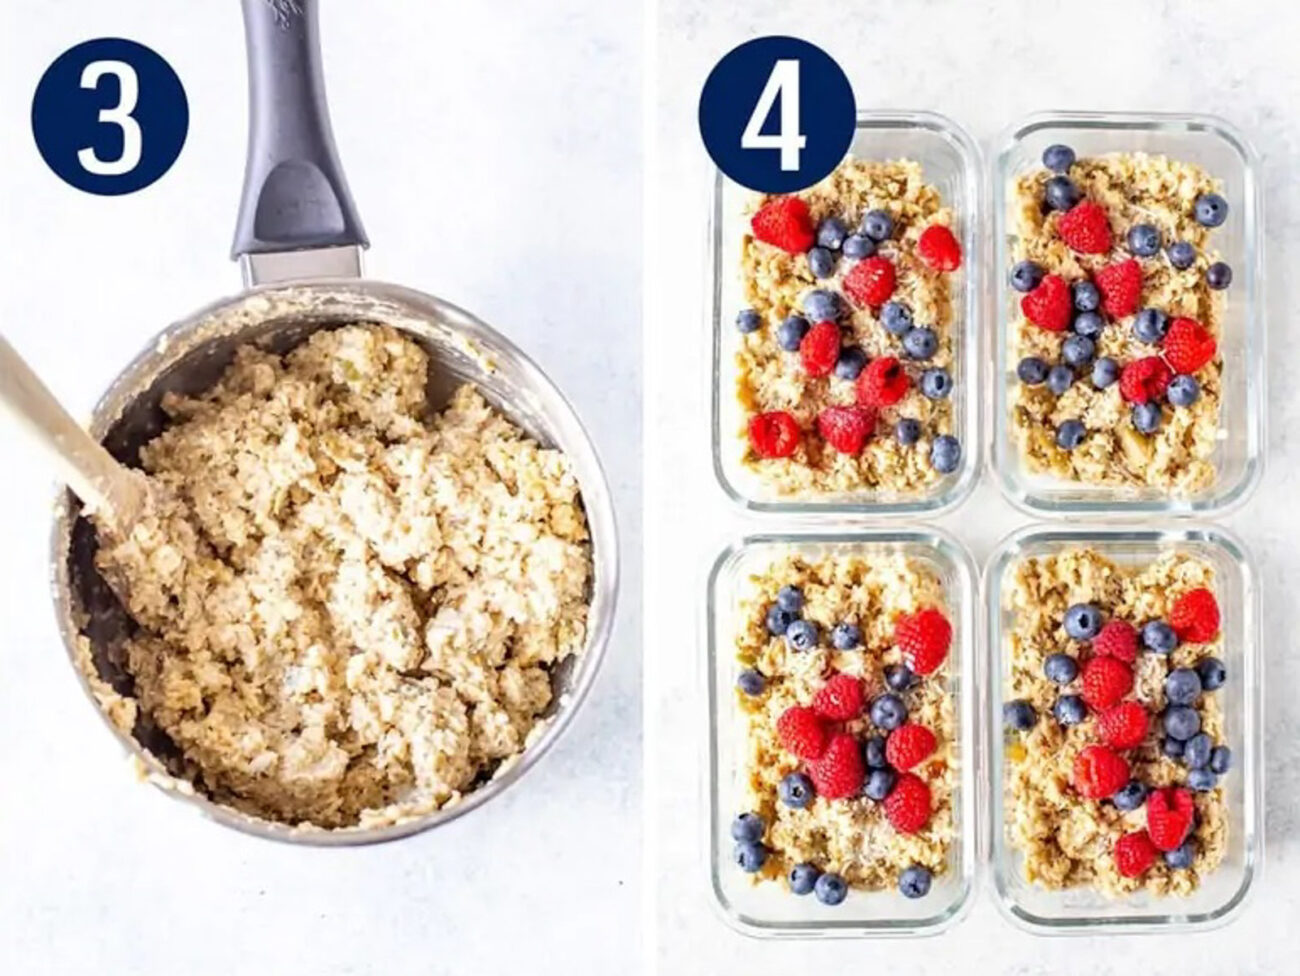 Steps 3 and 4 for making protein oatmeal: Add in protein powder then serve.